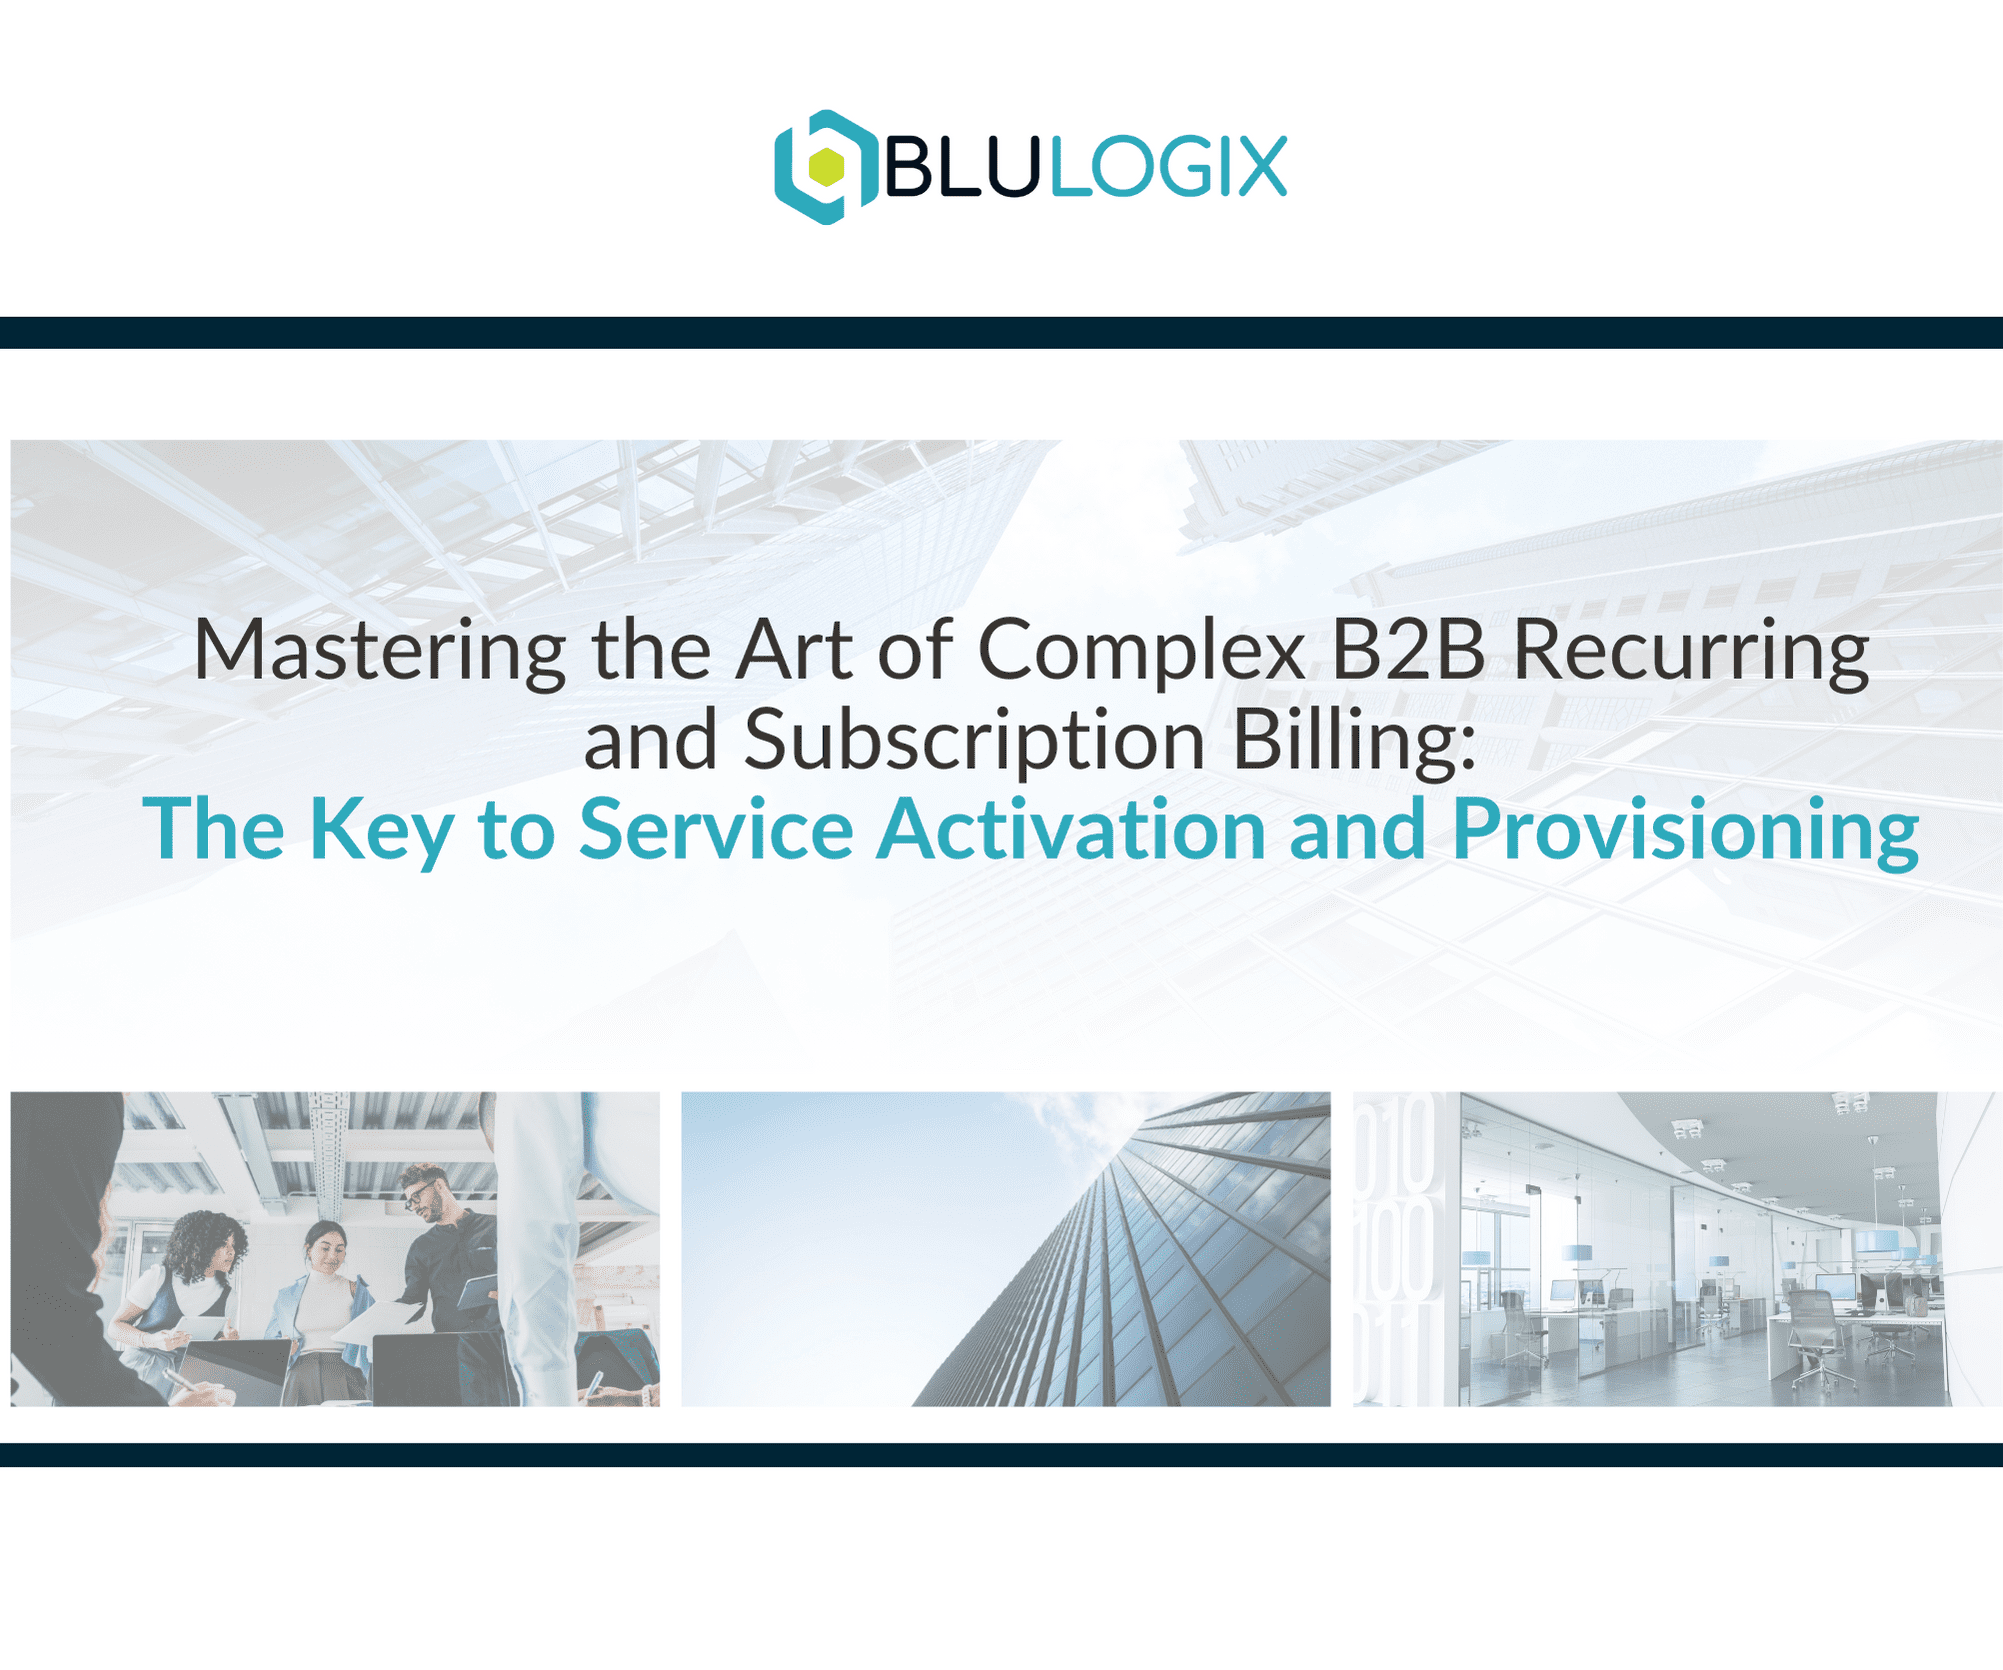 The Key to Service Activation and Provisioning